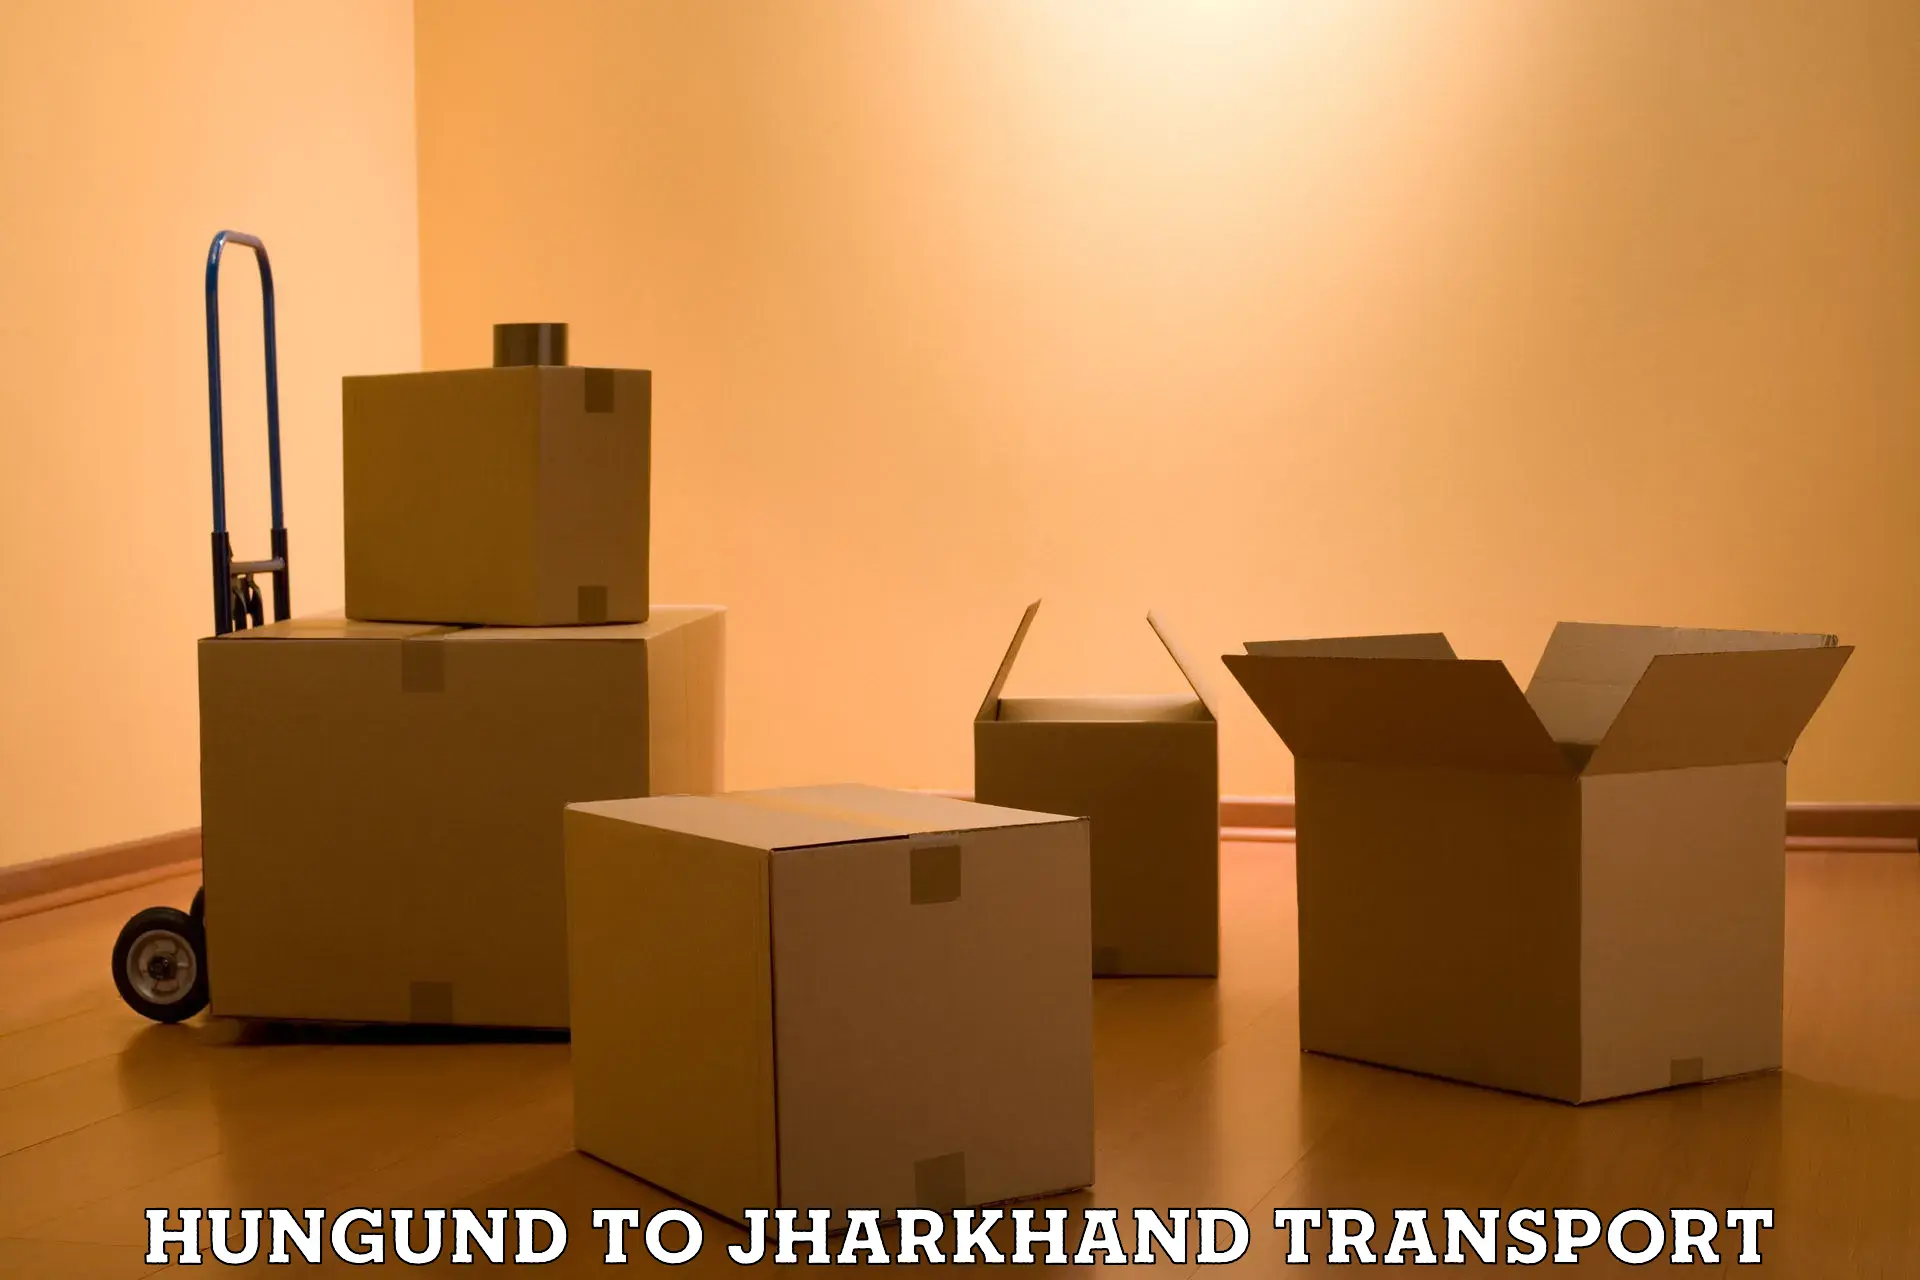 Container transport service Hungund to Jharkhand